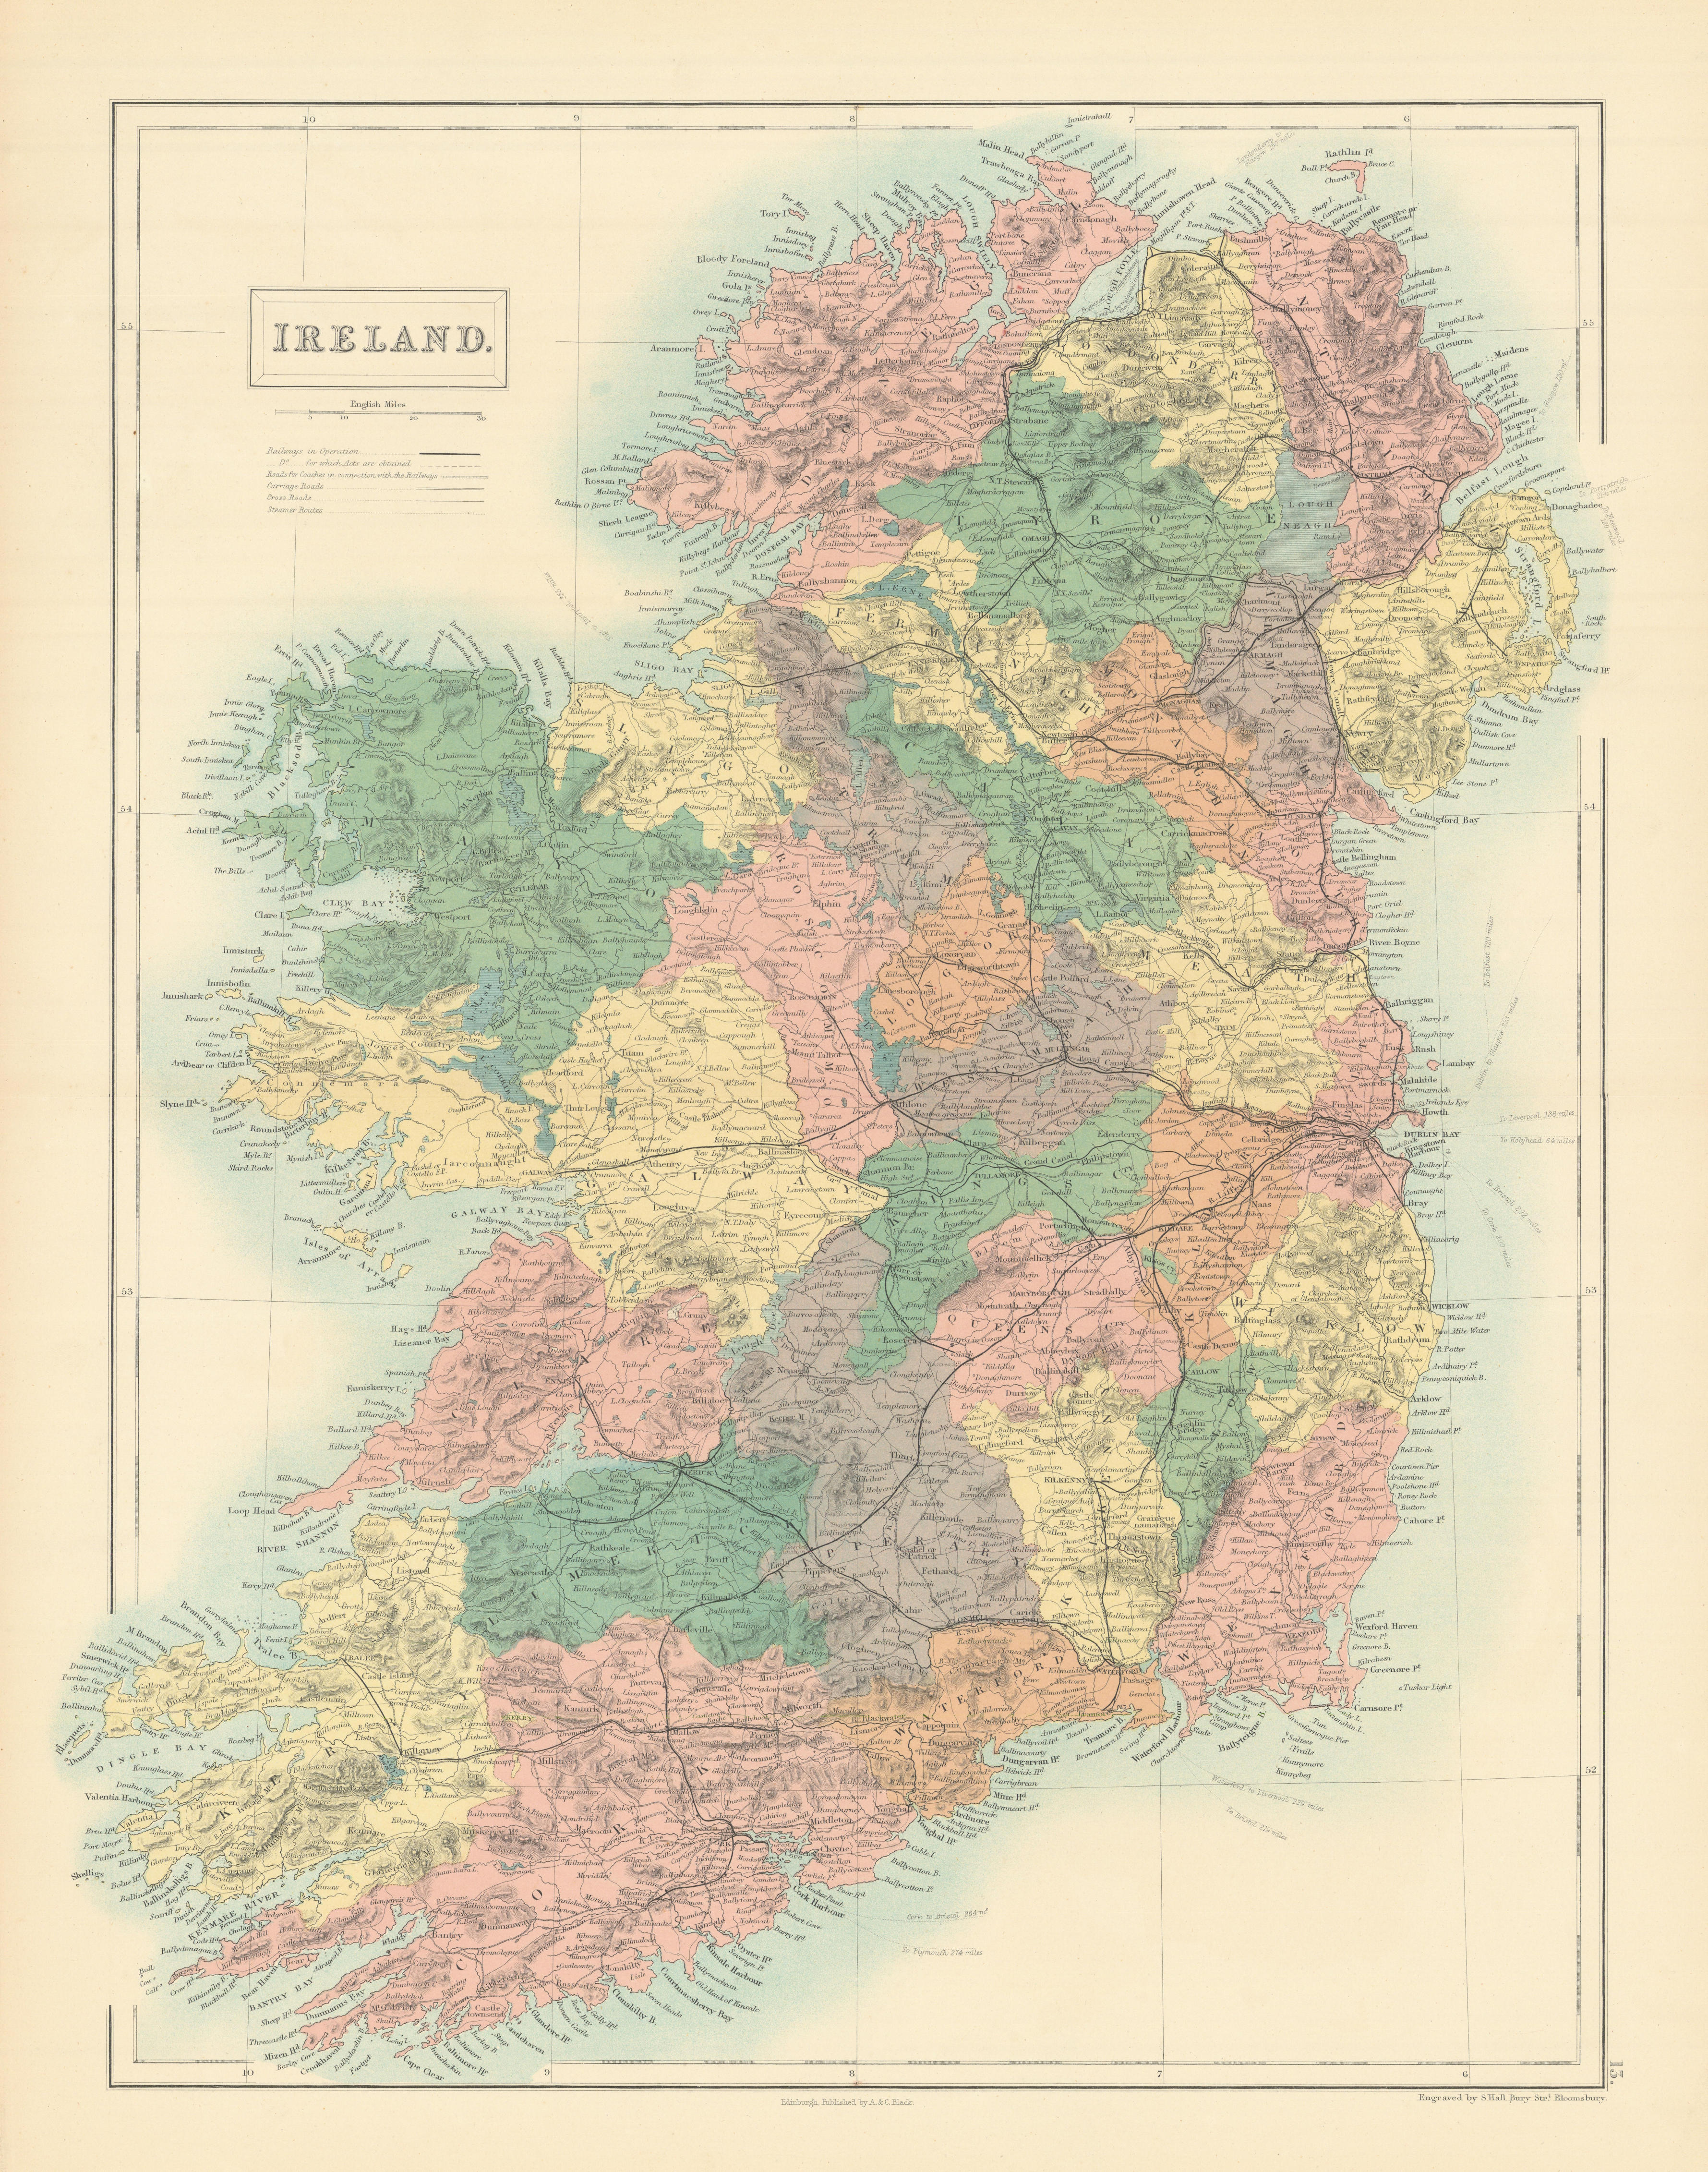 Associate Product Ireland showing counties & railways by SIDNEY HALL 1862 old antique map chart